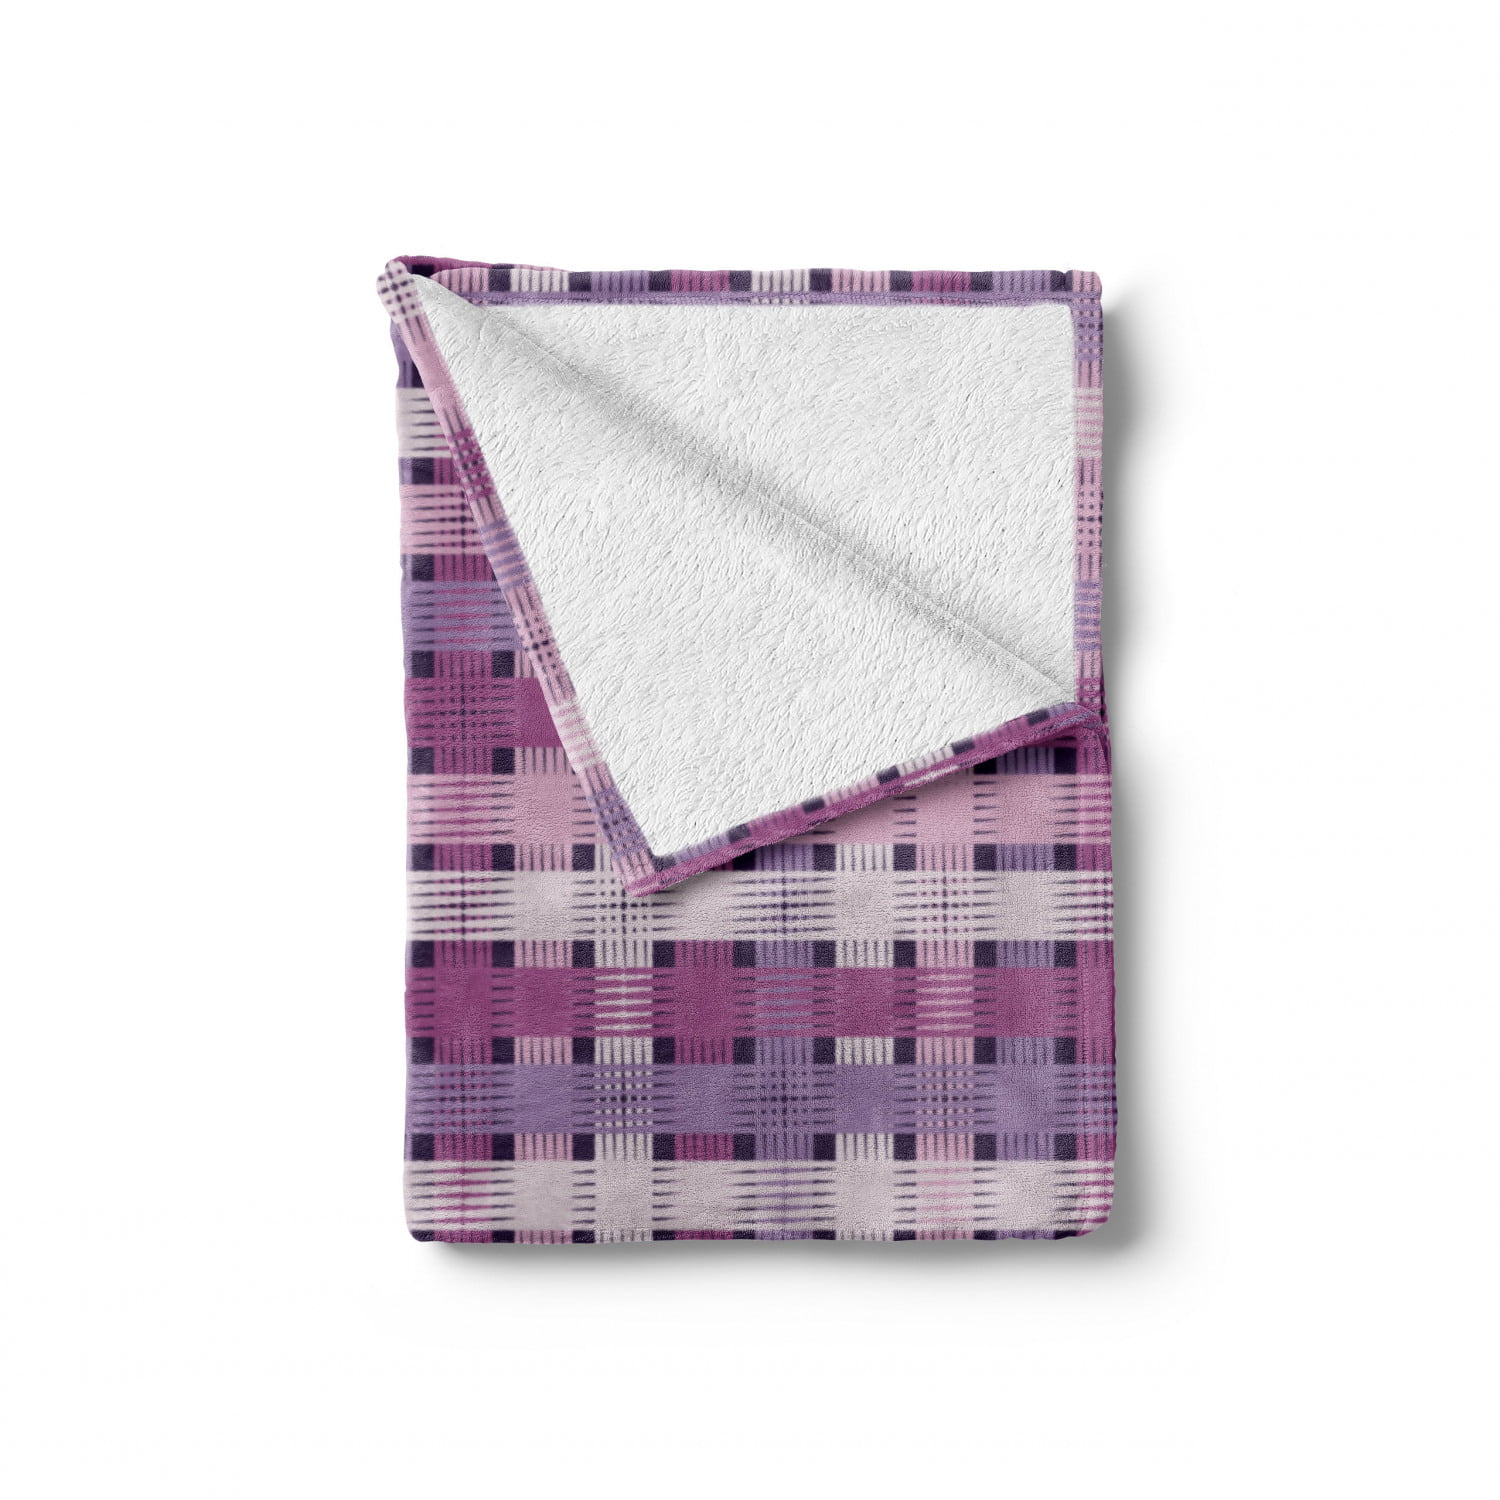 Abstract Geometric Motifs with Hatched Style in Purple Pink Tones Ambesonne Colorful Soft Flannel Fleece Throw Blanket Pale Mauve and Pale Fuchsia Cozy Plush for Indoor and Outdoor Use 50 x 60 